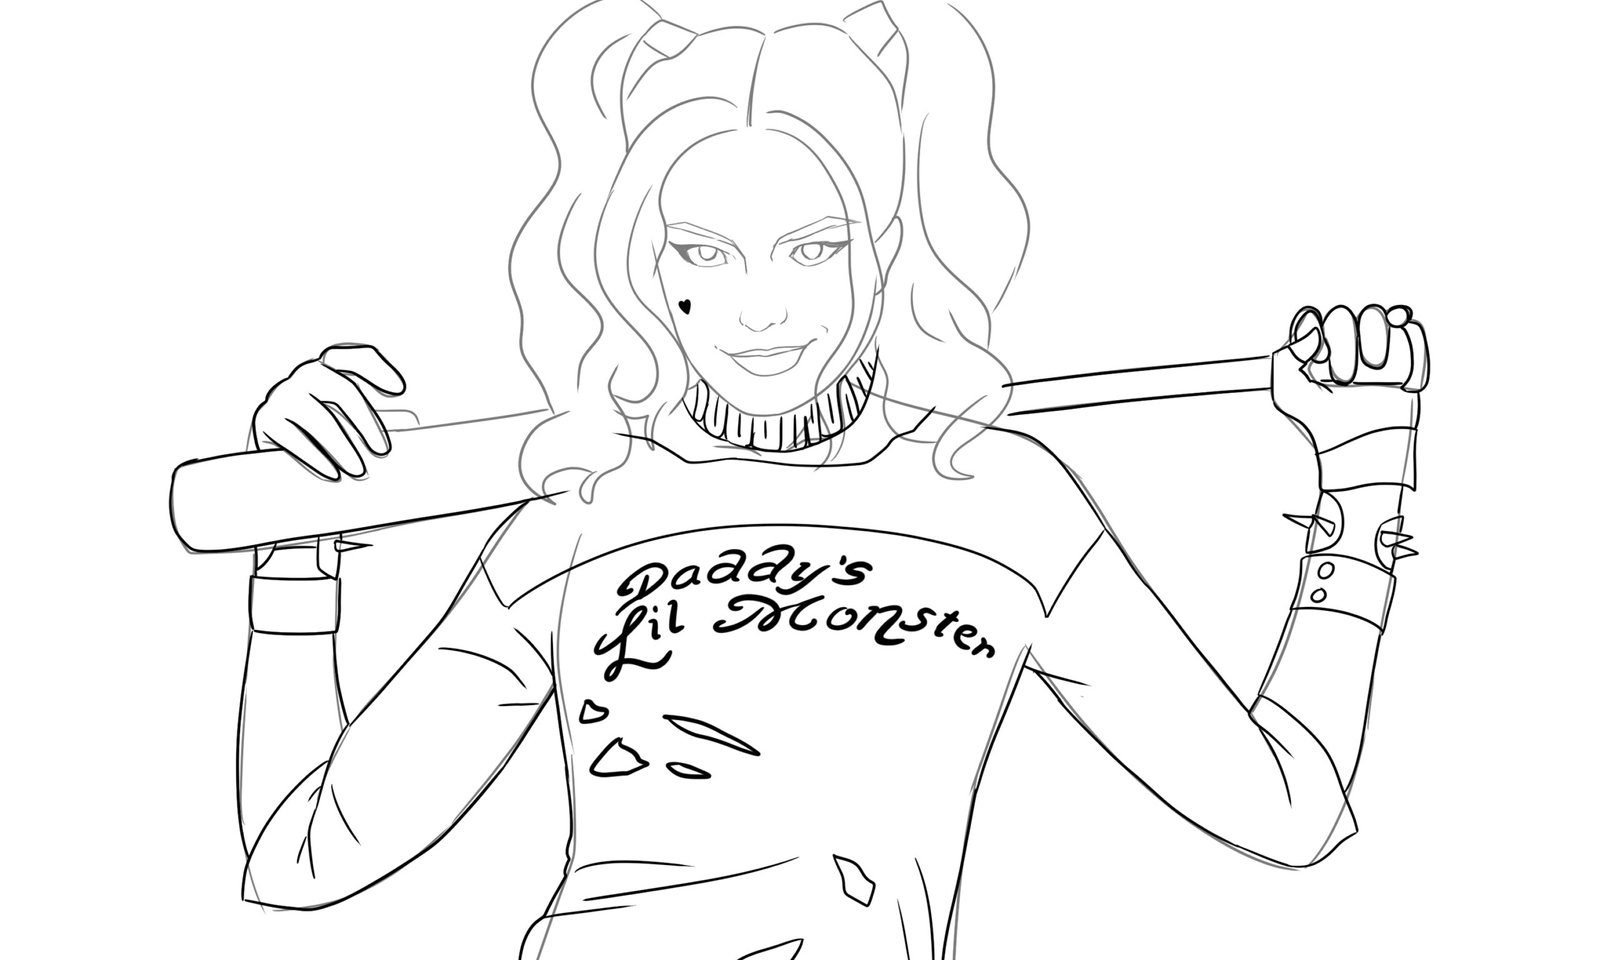 Draw Harley Quinn’s Spiked Bracelet, ripped collar and shirt